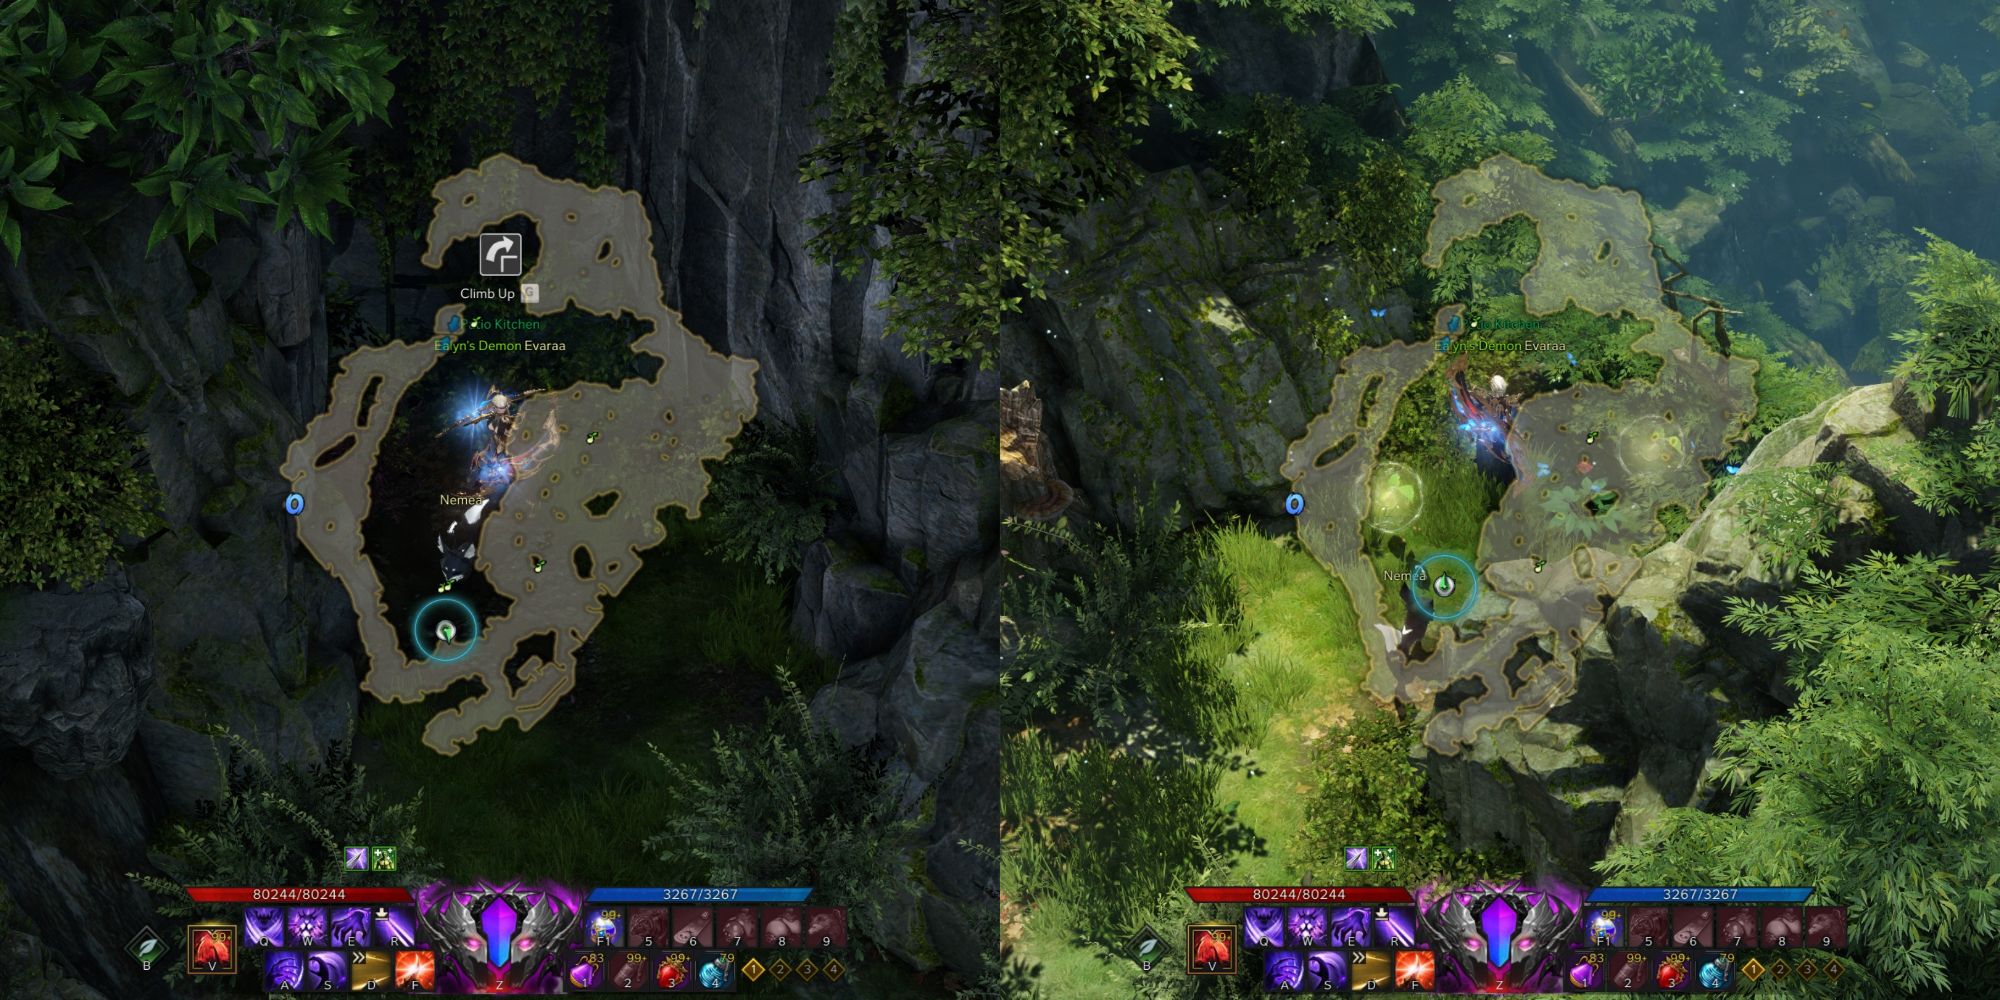 Lost Ark split image of Naruni Island Mokoko Seeds 2 and 3 location with minimap open and their hidden location